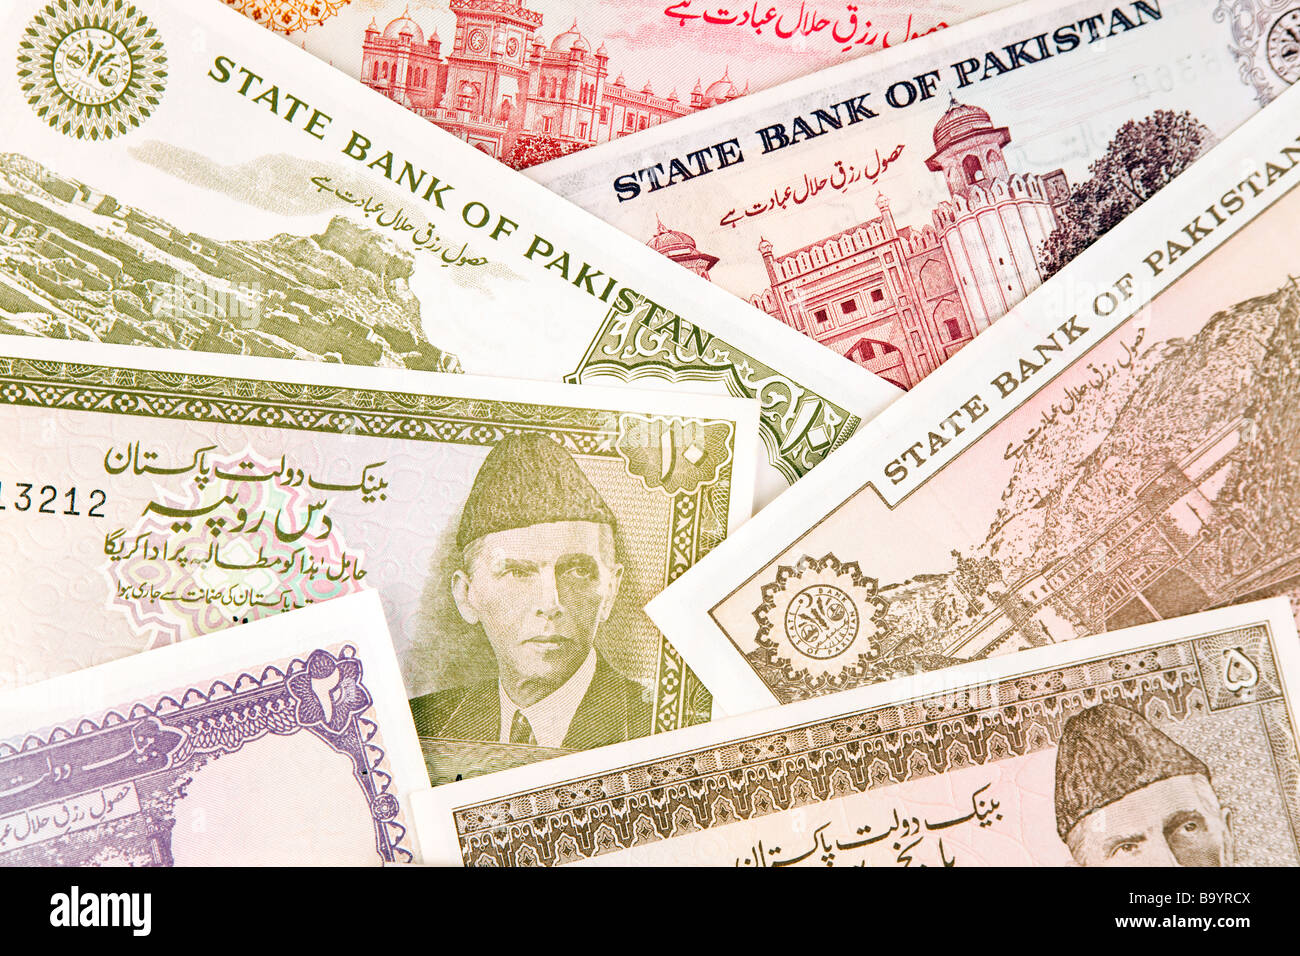 Money currency detail of Pakistani banknotes Stock Photo